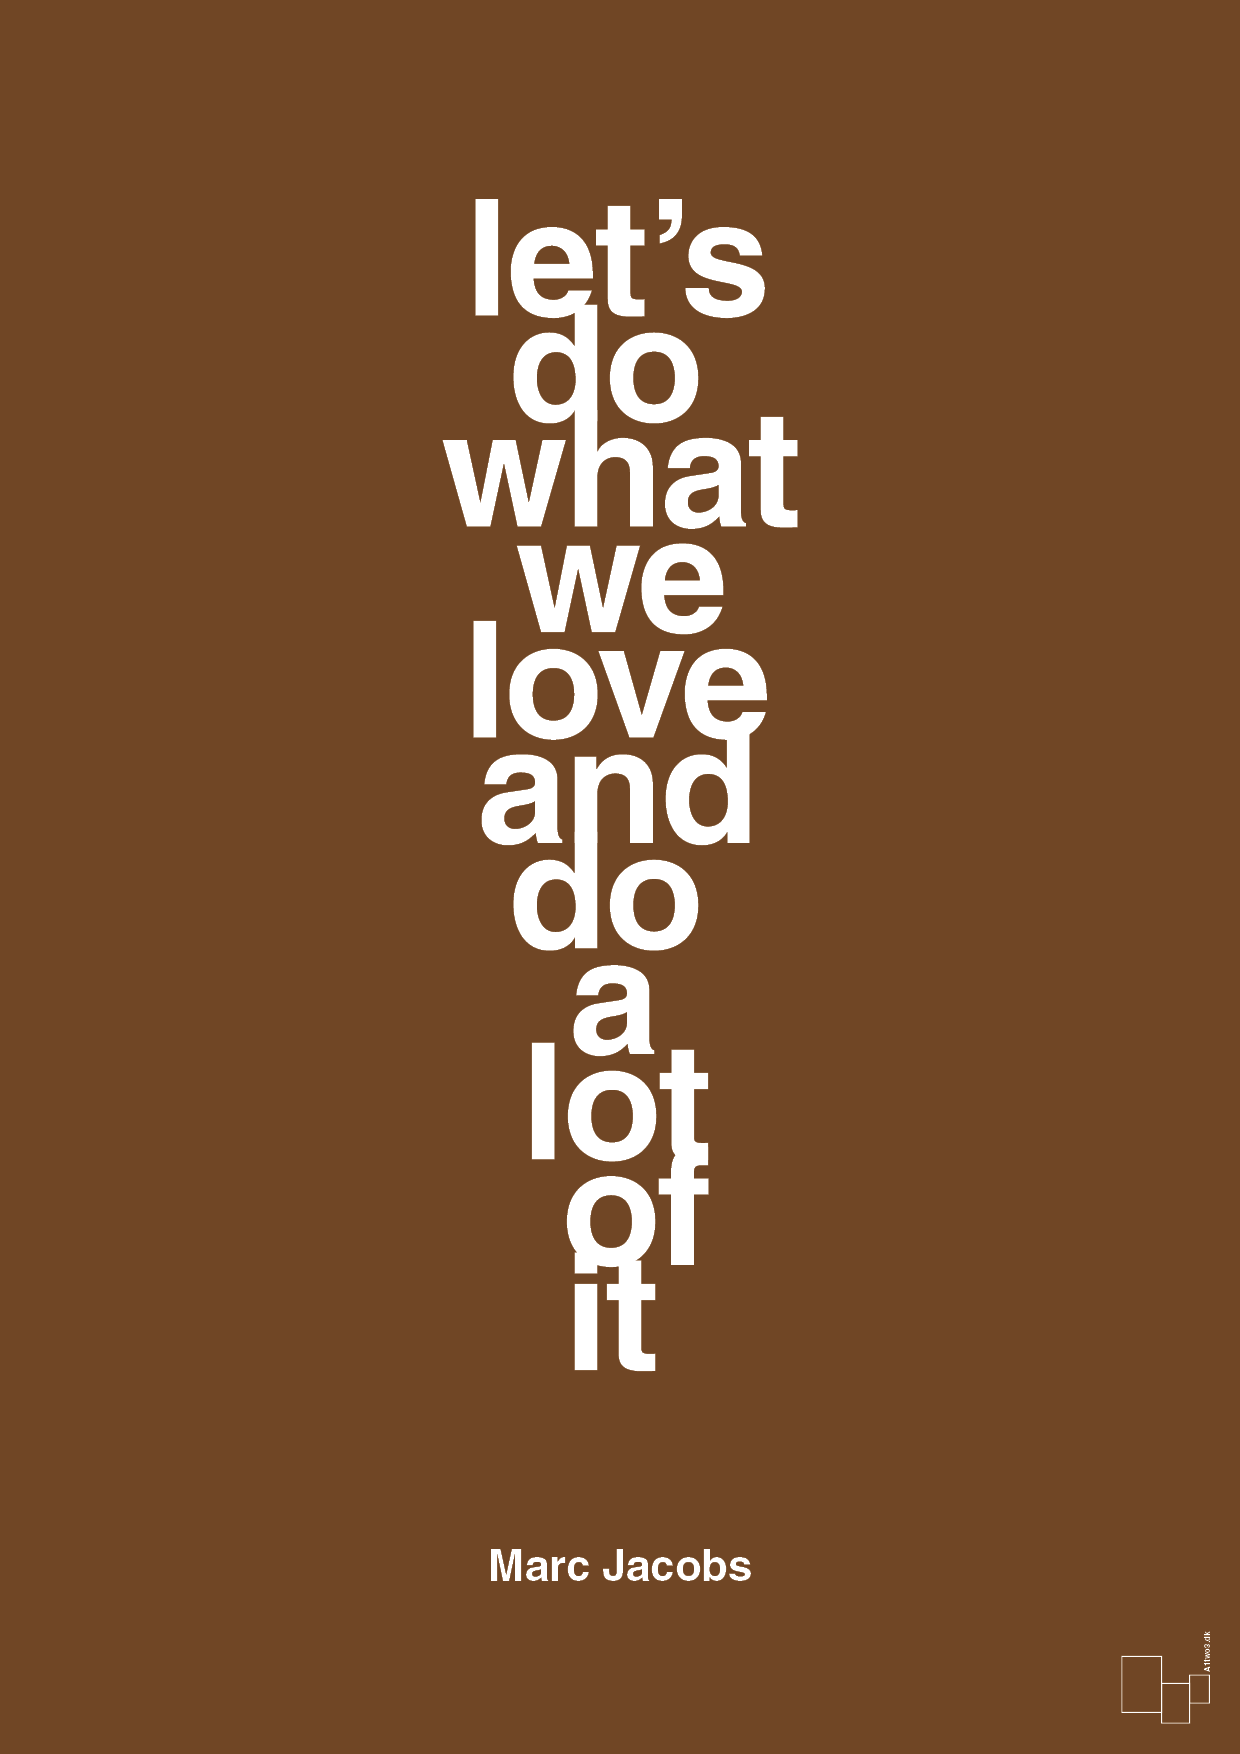 lets do what we love and do a lot of it - Plakat med Citater i Dark Brown